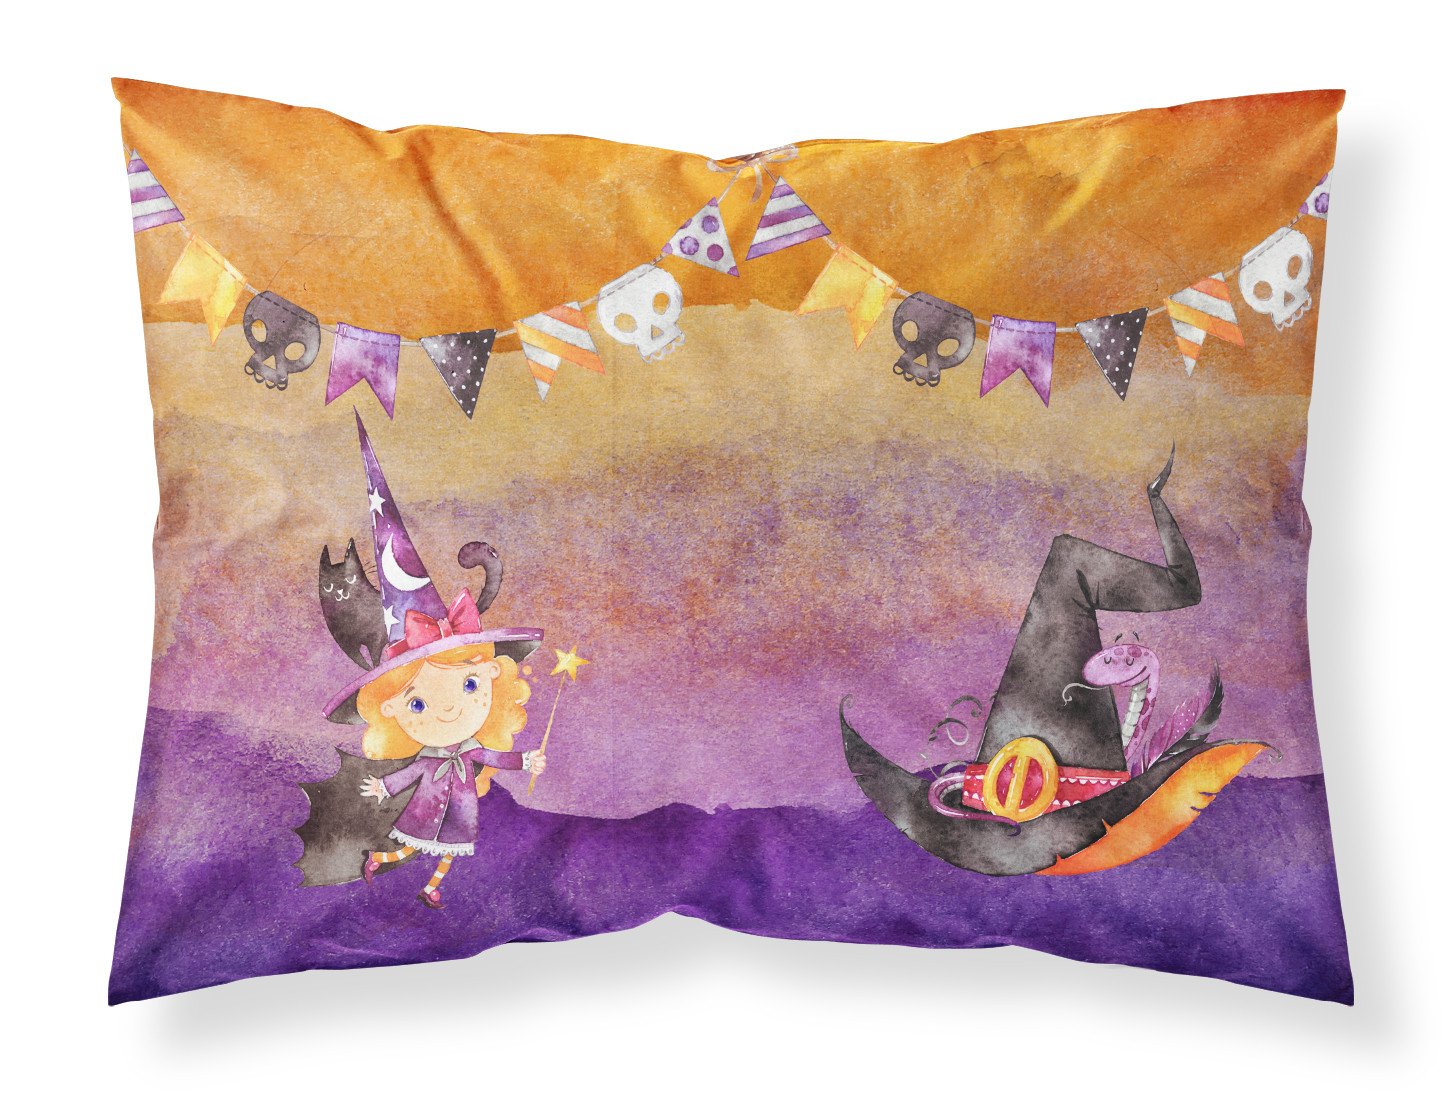 Halloween Little Witch Party Fabric Standard Pillowcase BB7462PILLOWCASE by Caroline's Treasures